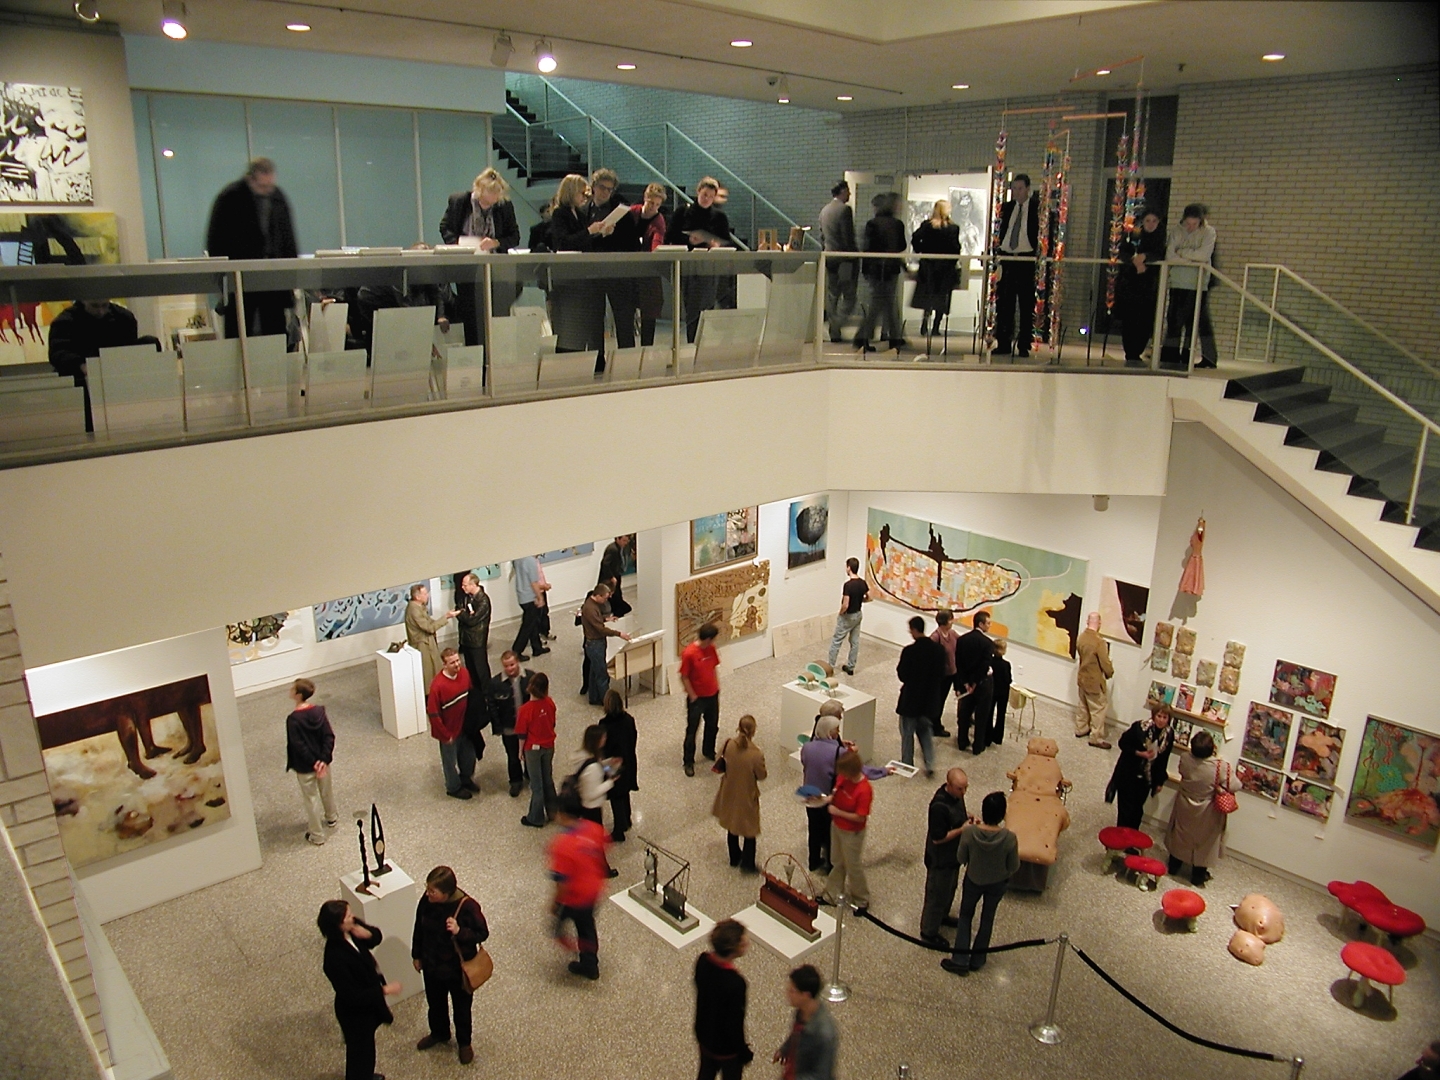 People viewing art exhibits in a multi-level gallery with balconies and staircases.